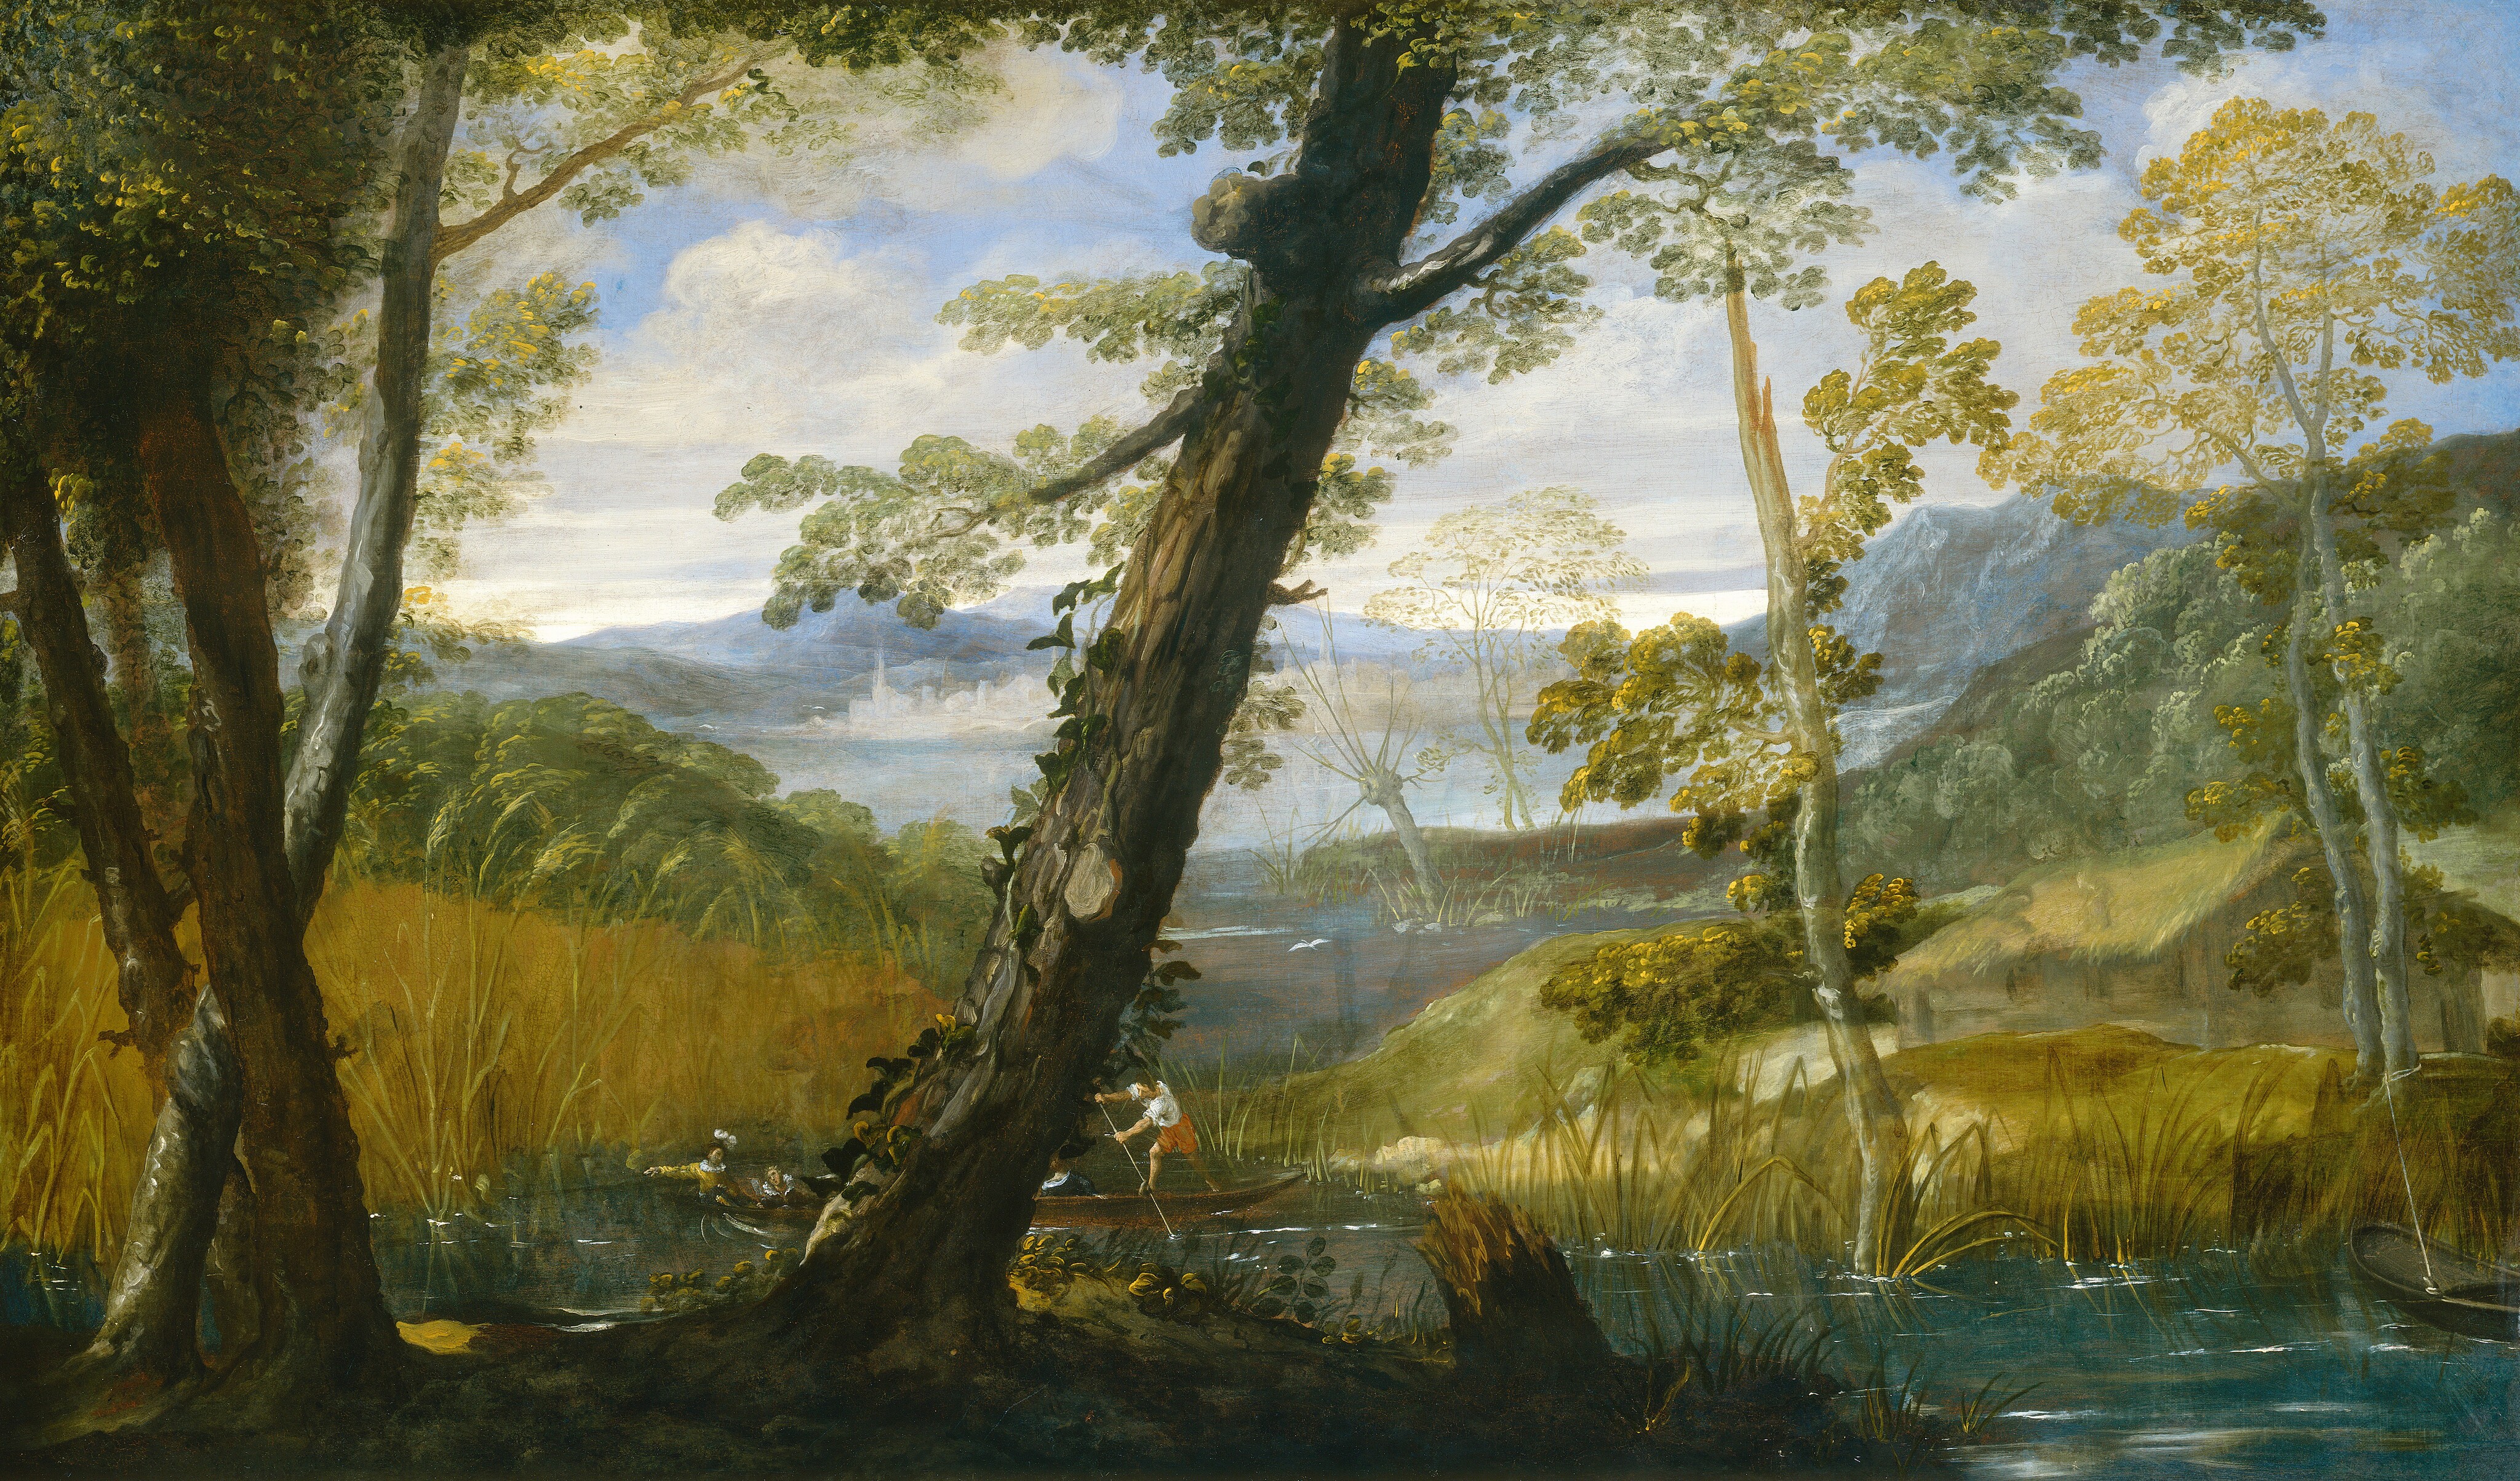 Landscape with Classical Figures on and beside a Lake Painting